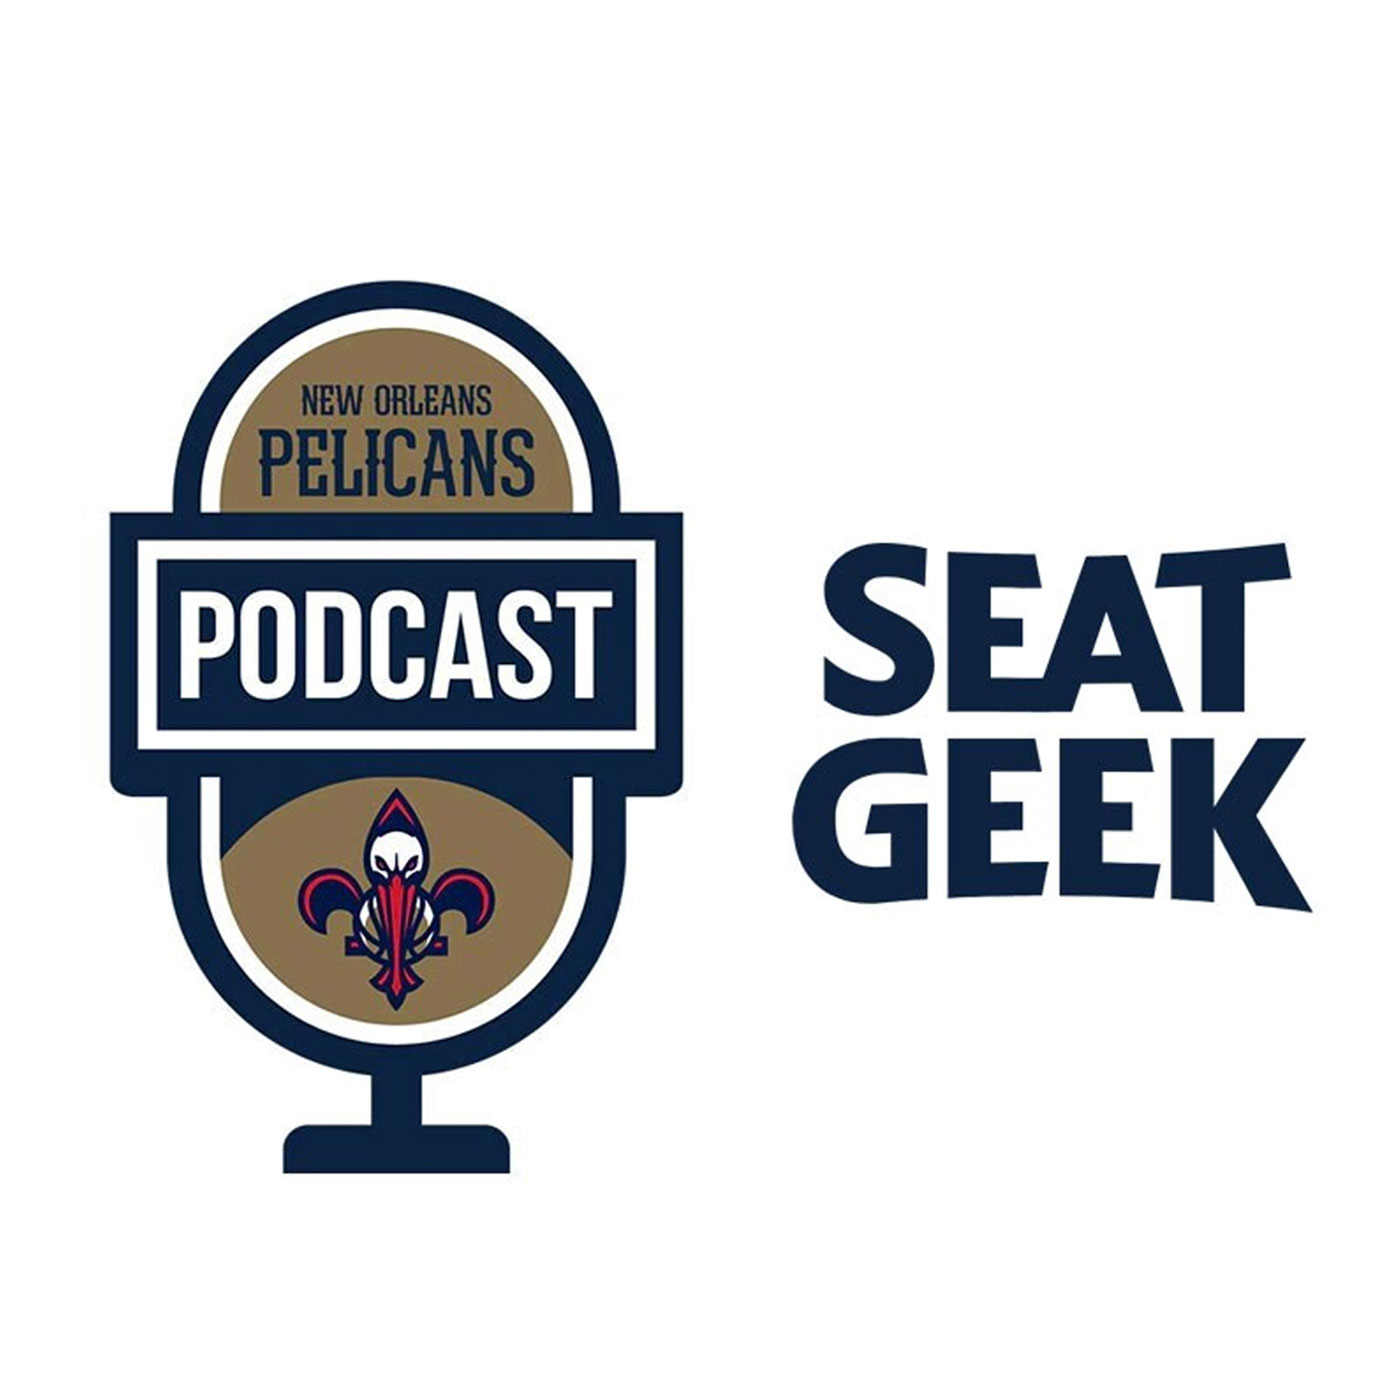 Andrew Lopez on the New Orleans Pelicans Podcast presented by SeatGeek - October 4, 2021